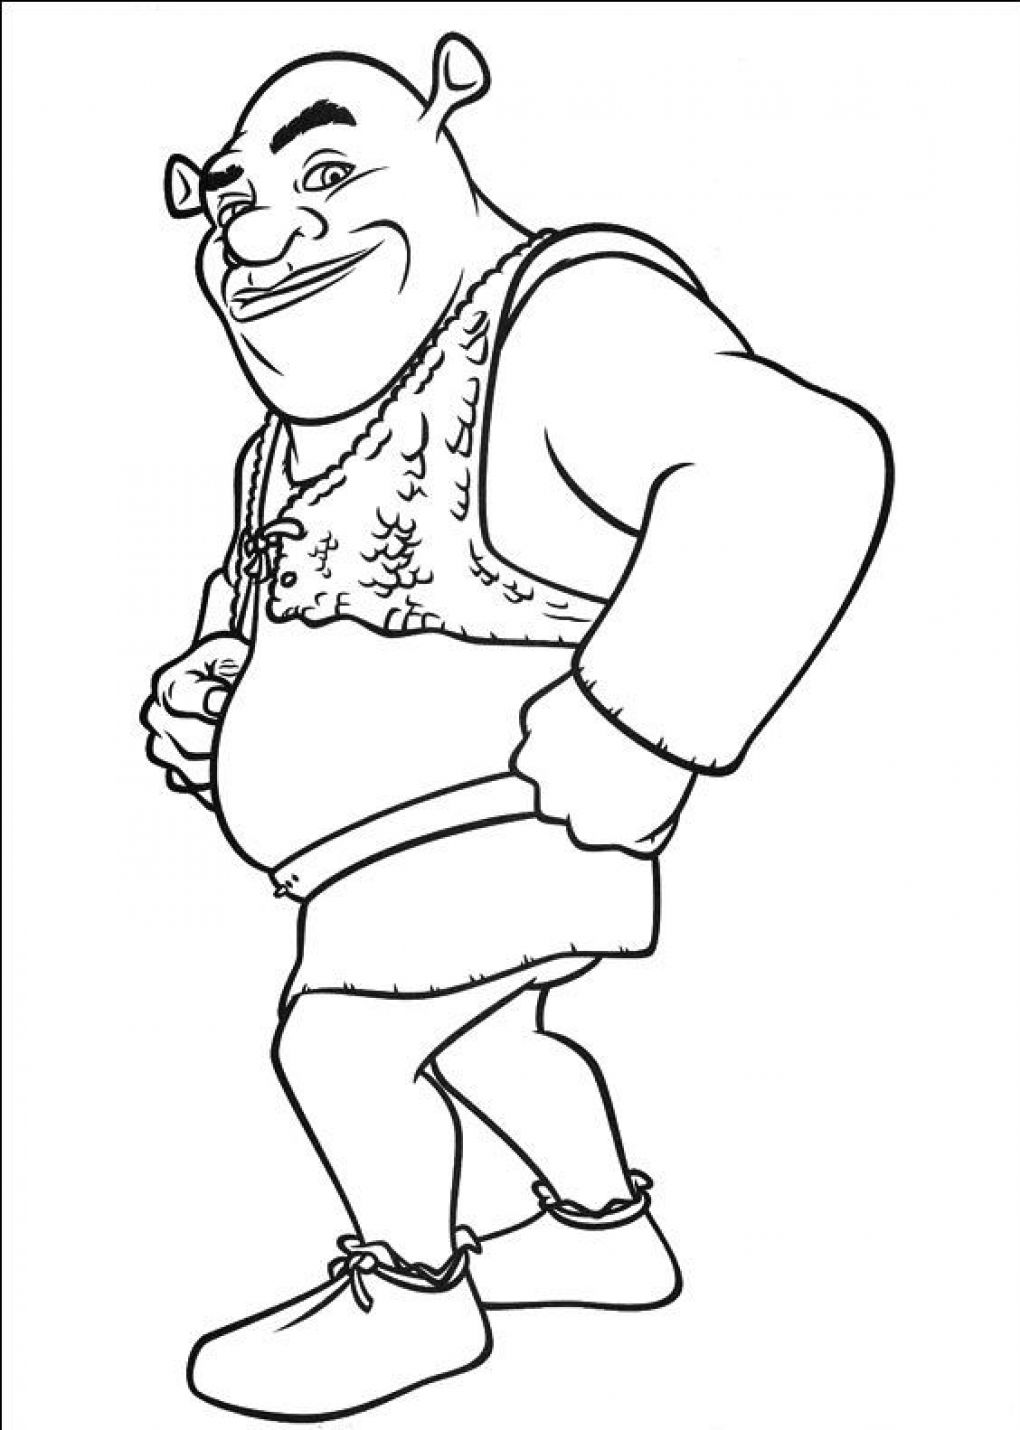 Download Free Printable Shrek Coloring Pages For Kids